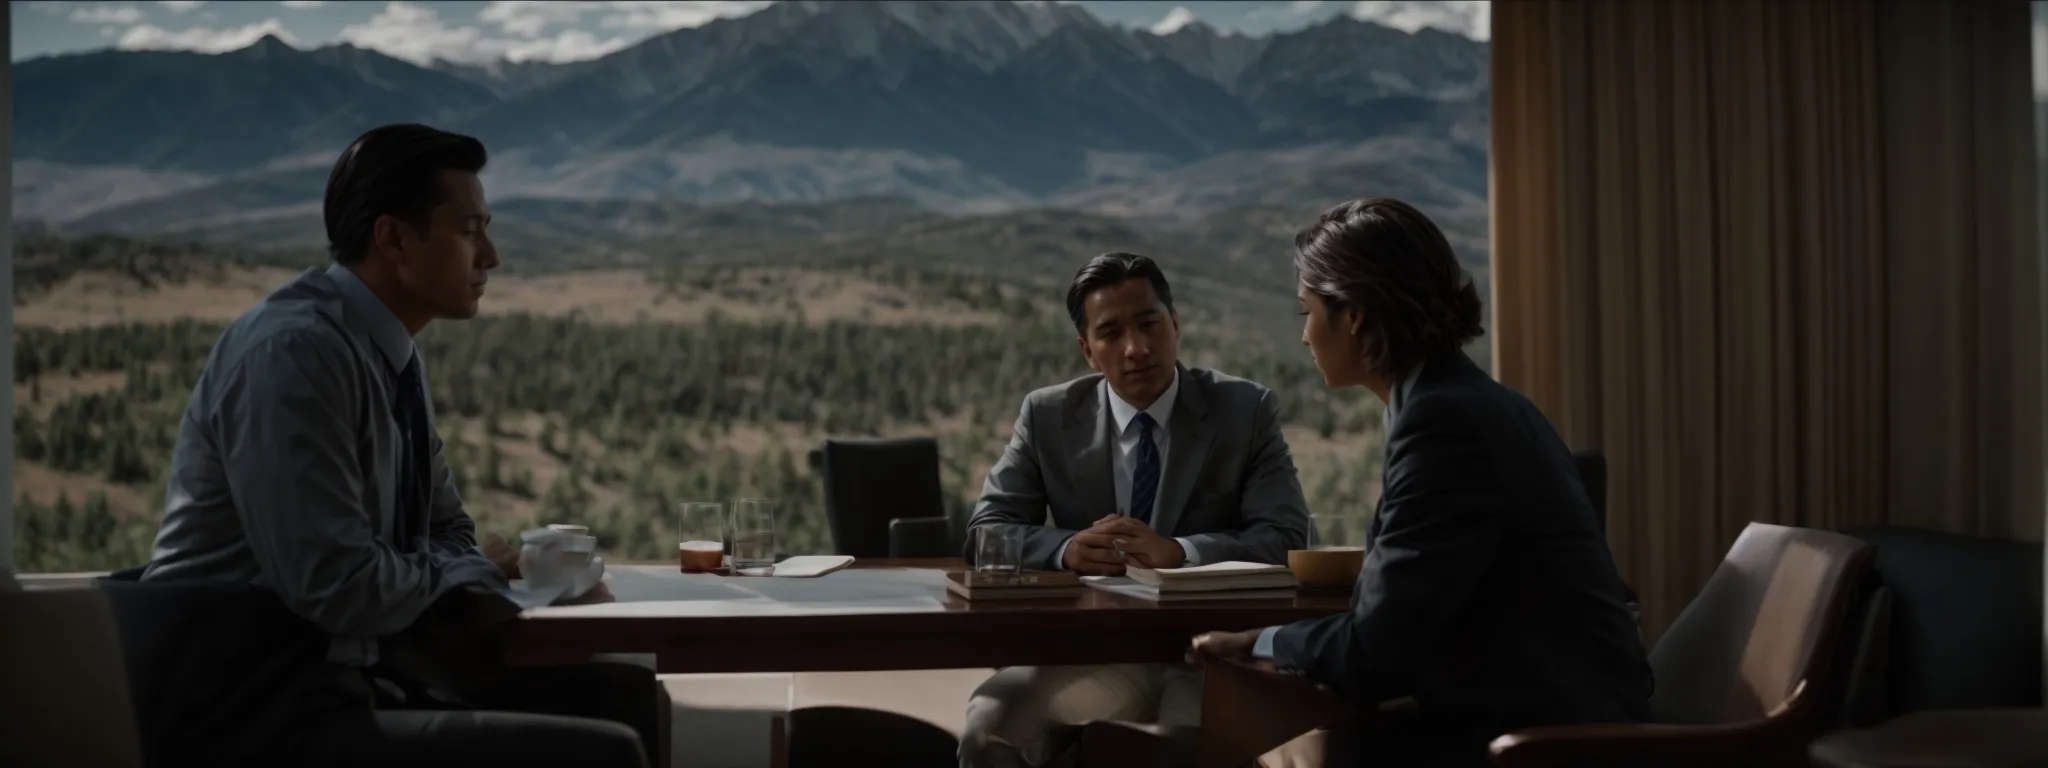 a lawyer and a couple sit at a table, discussing documents with a view of the colorado mountains in the background.